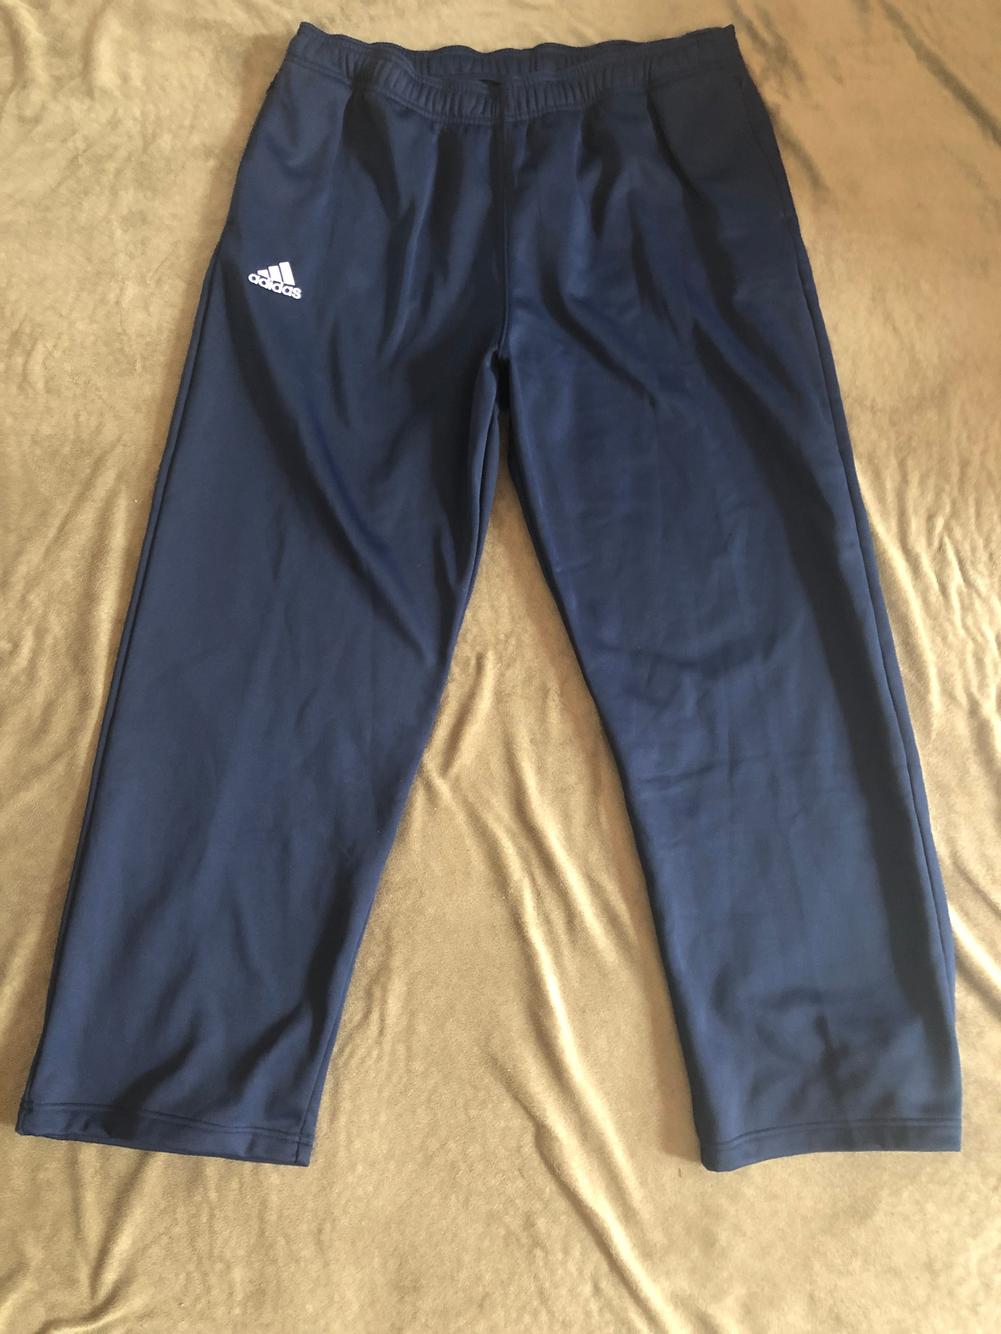 New Adidas NHL Colorado Avalanche Team Issued Fleece Track Pants ...